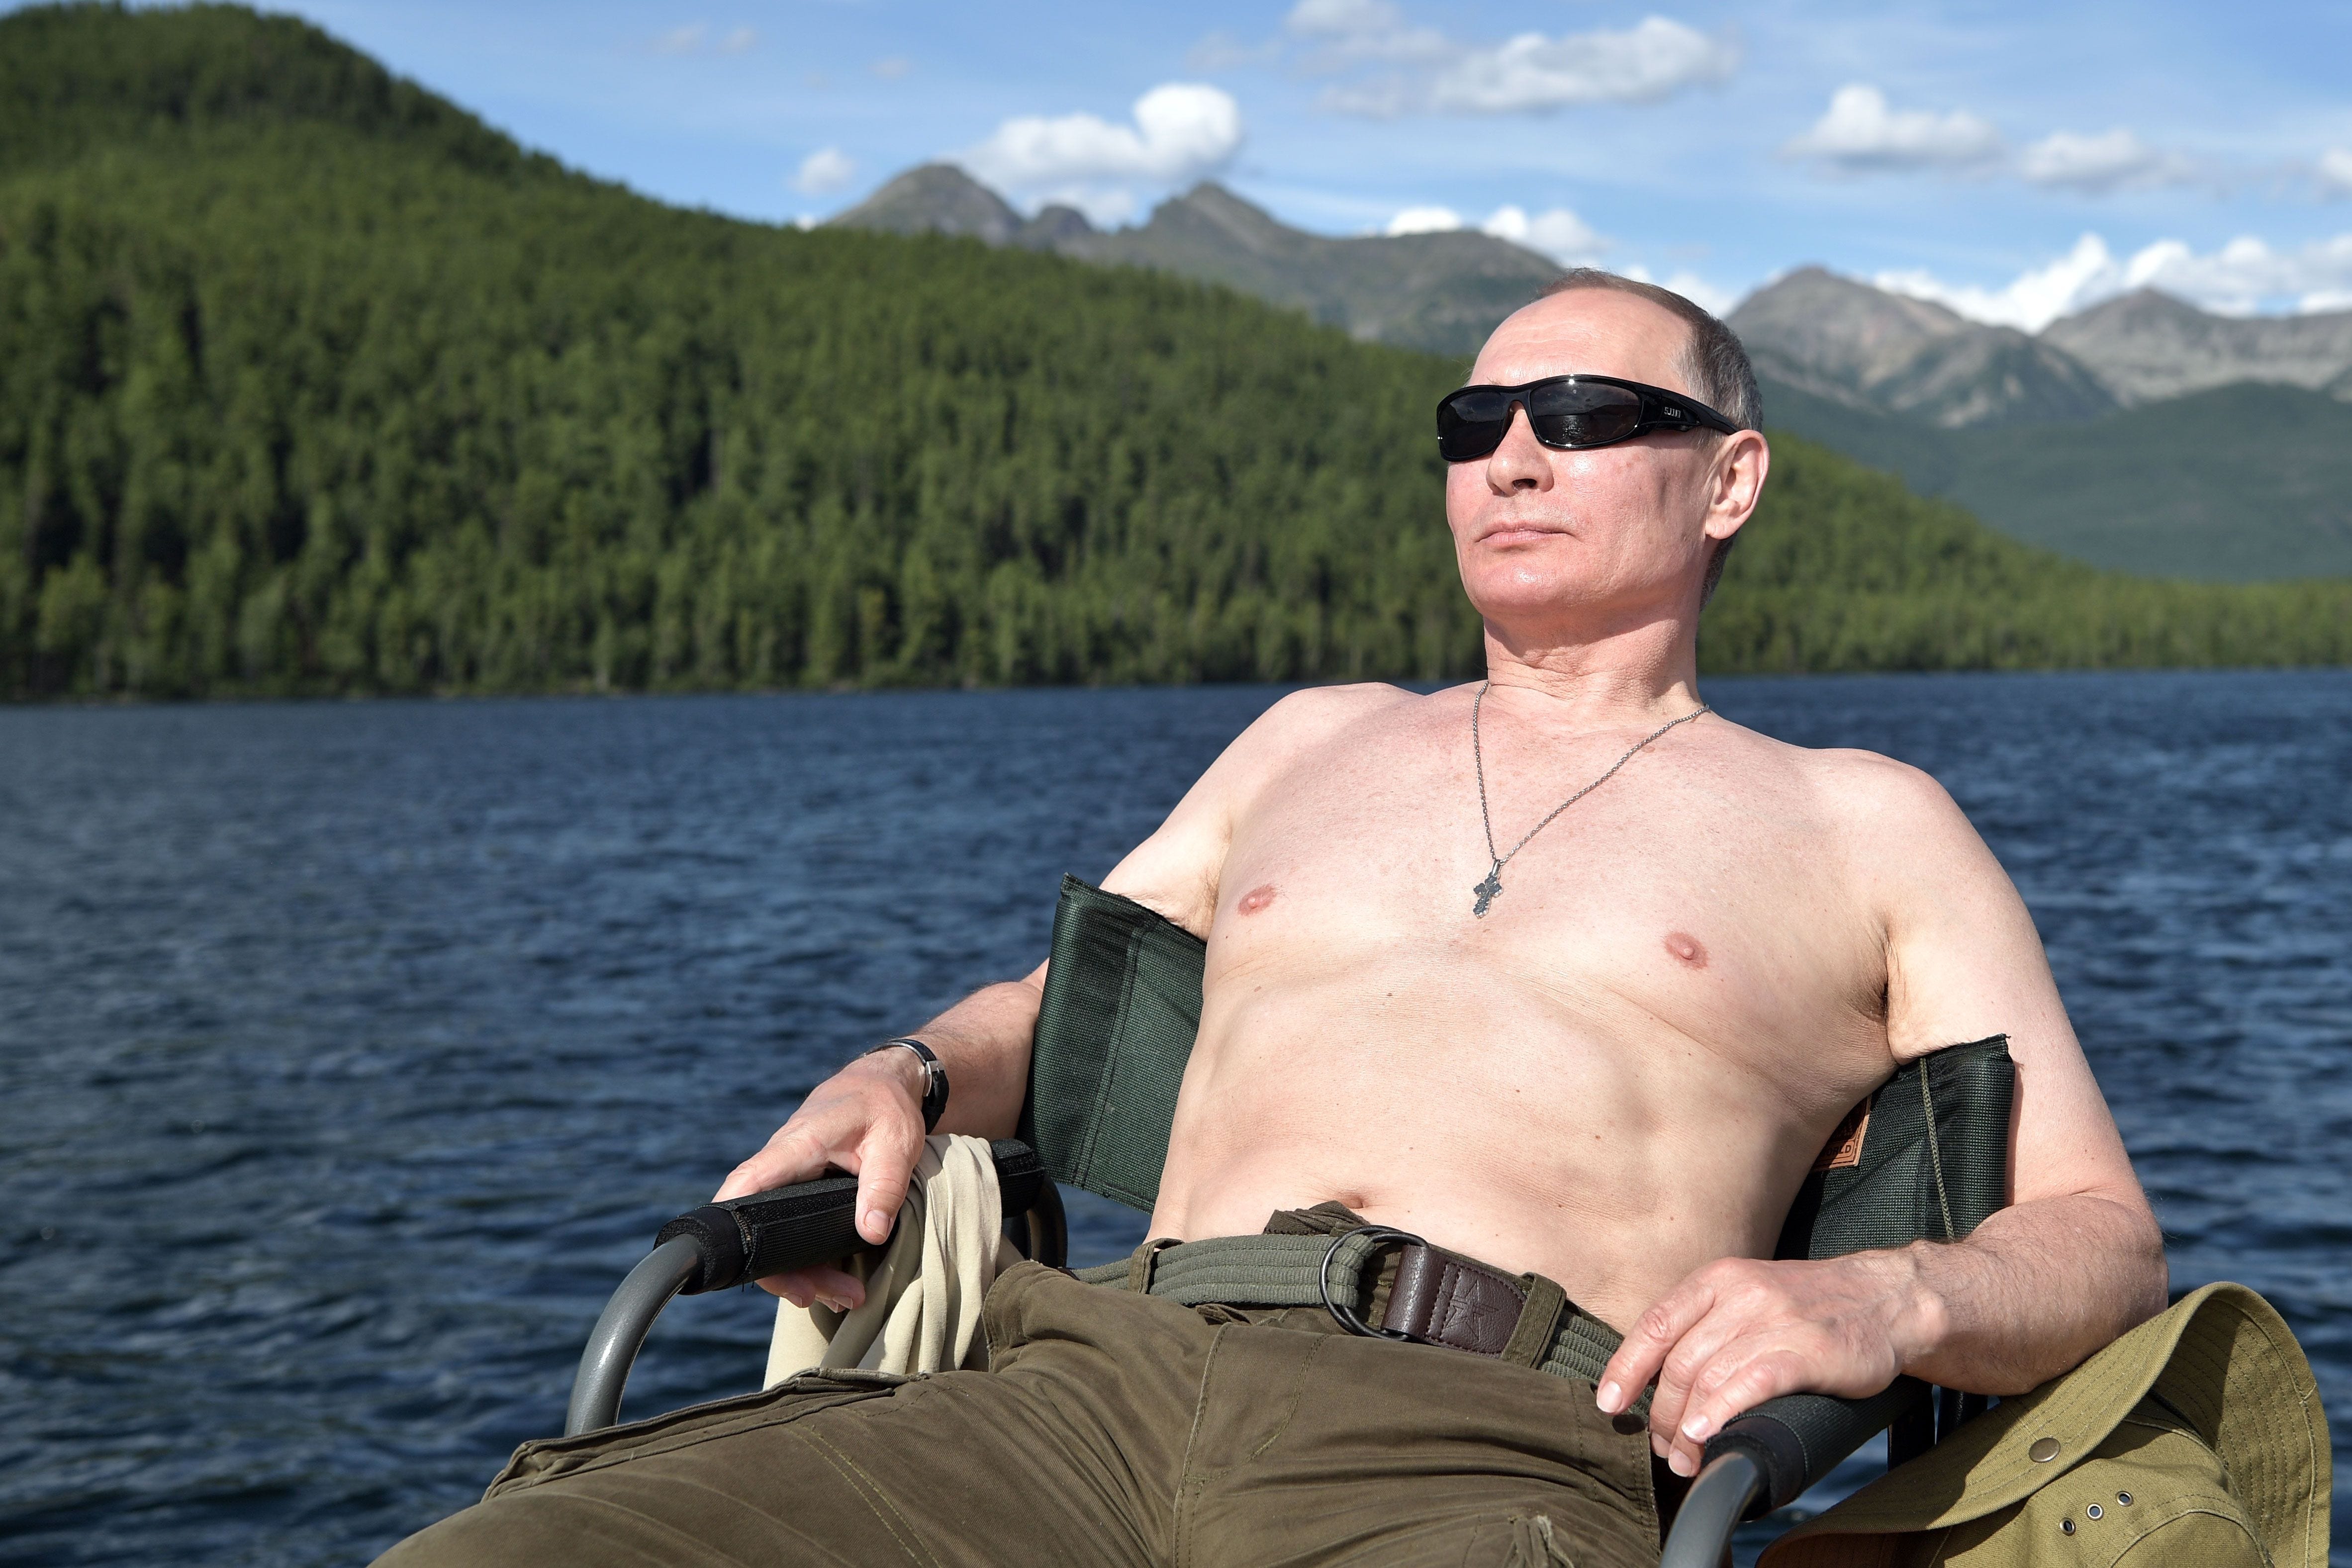 #Putinshirtlesschallenge: Russians accept call to show toned topless pictures